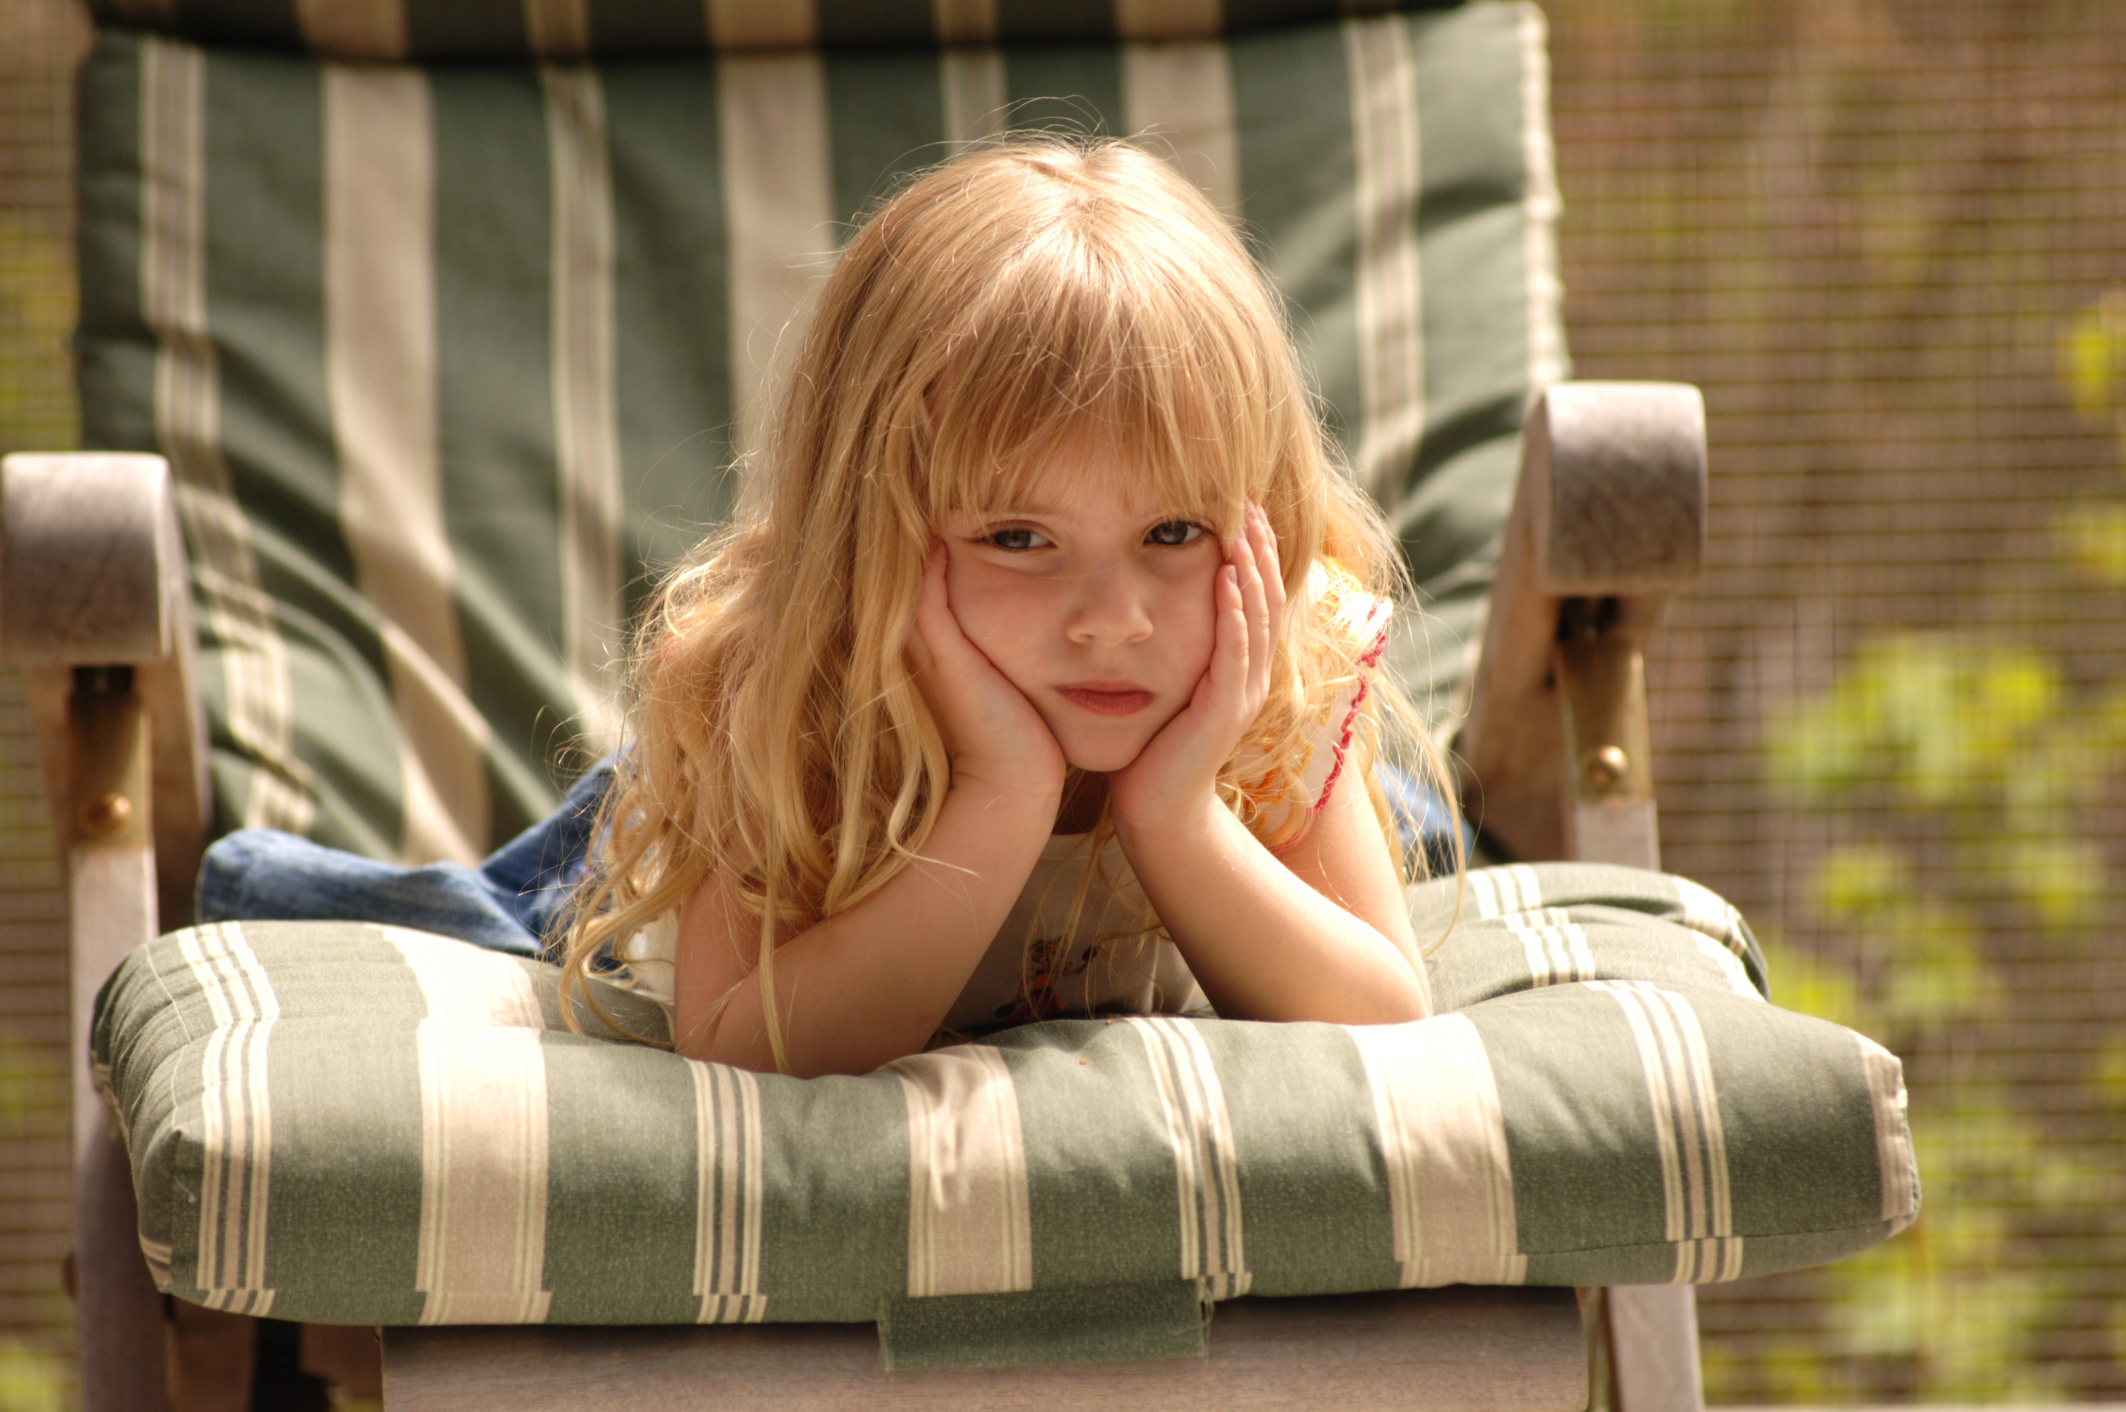 Blond girl on chair with her hands to her face